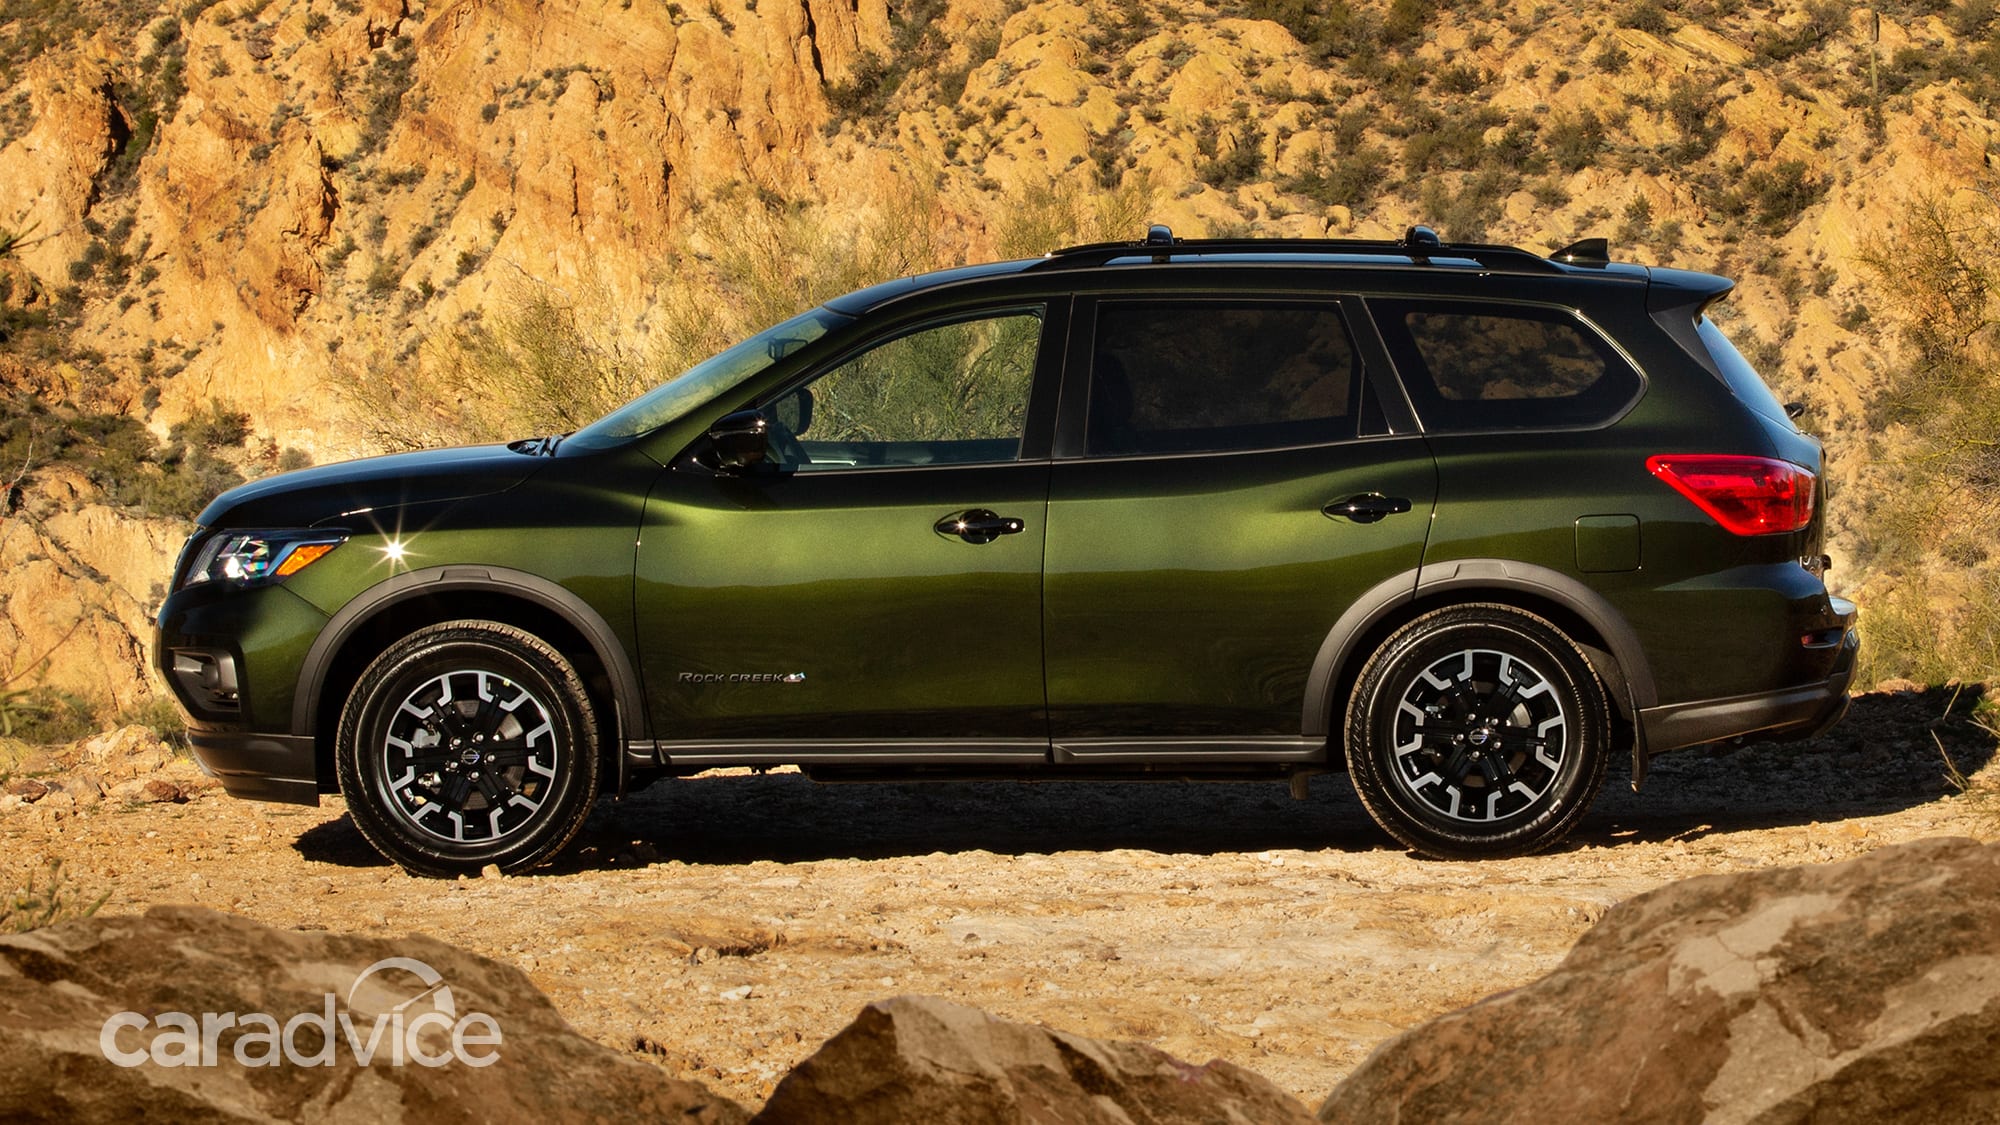 Nissan Pathfinder Rock Creek Edition revealed for the US CarAdvice